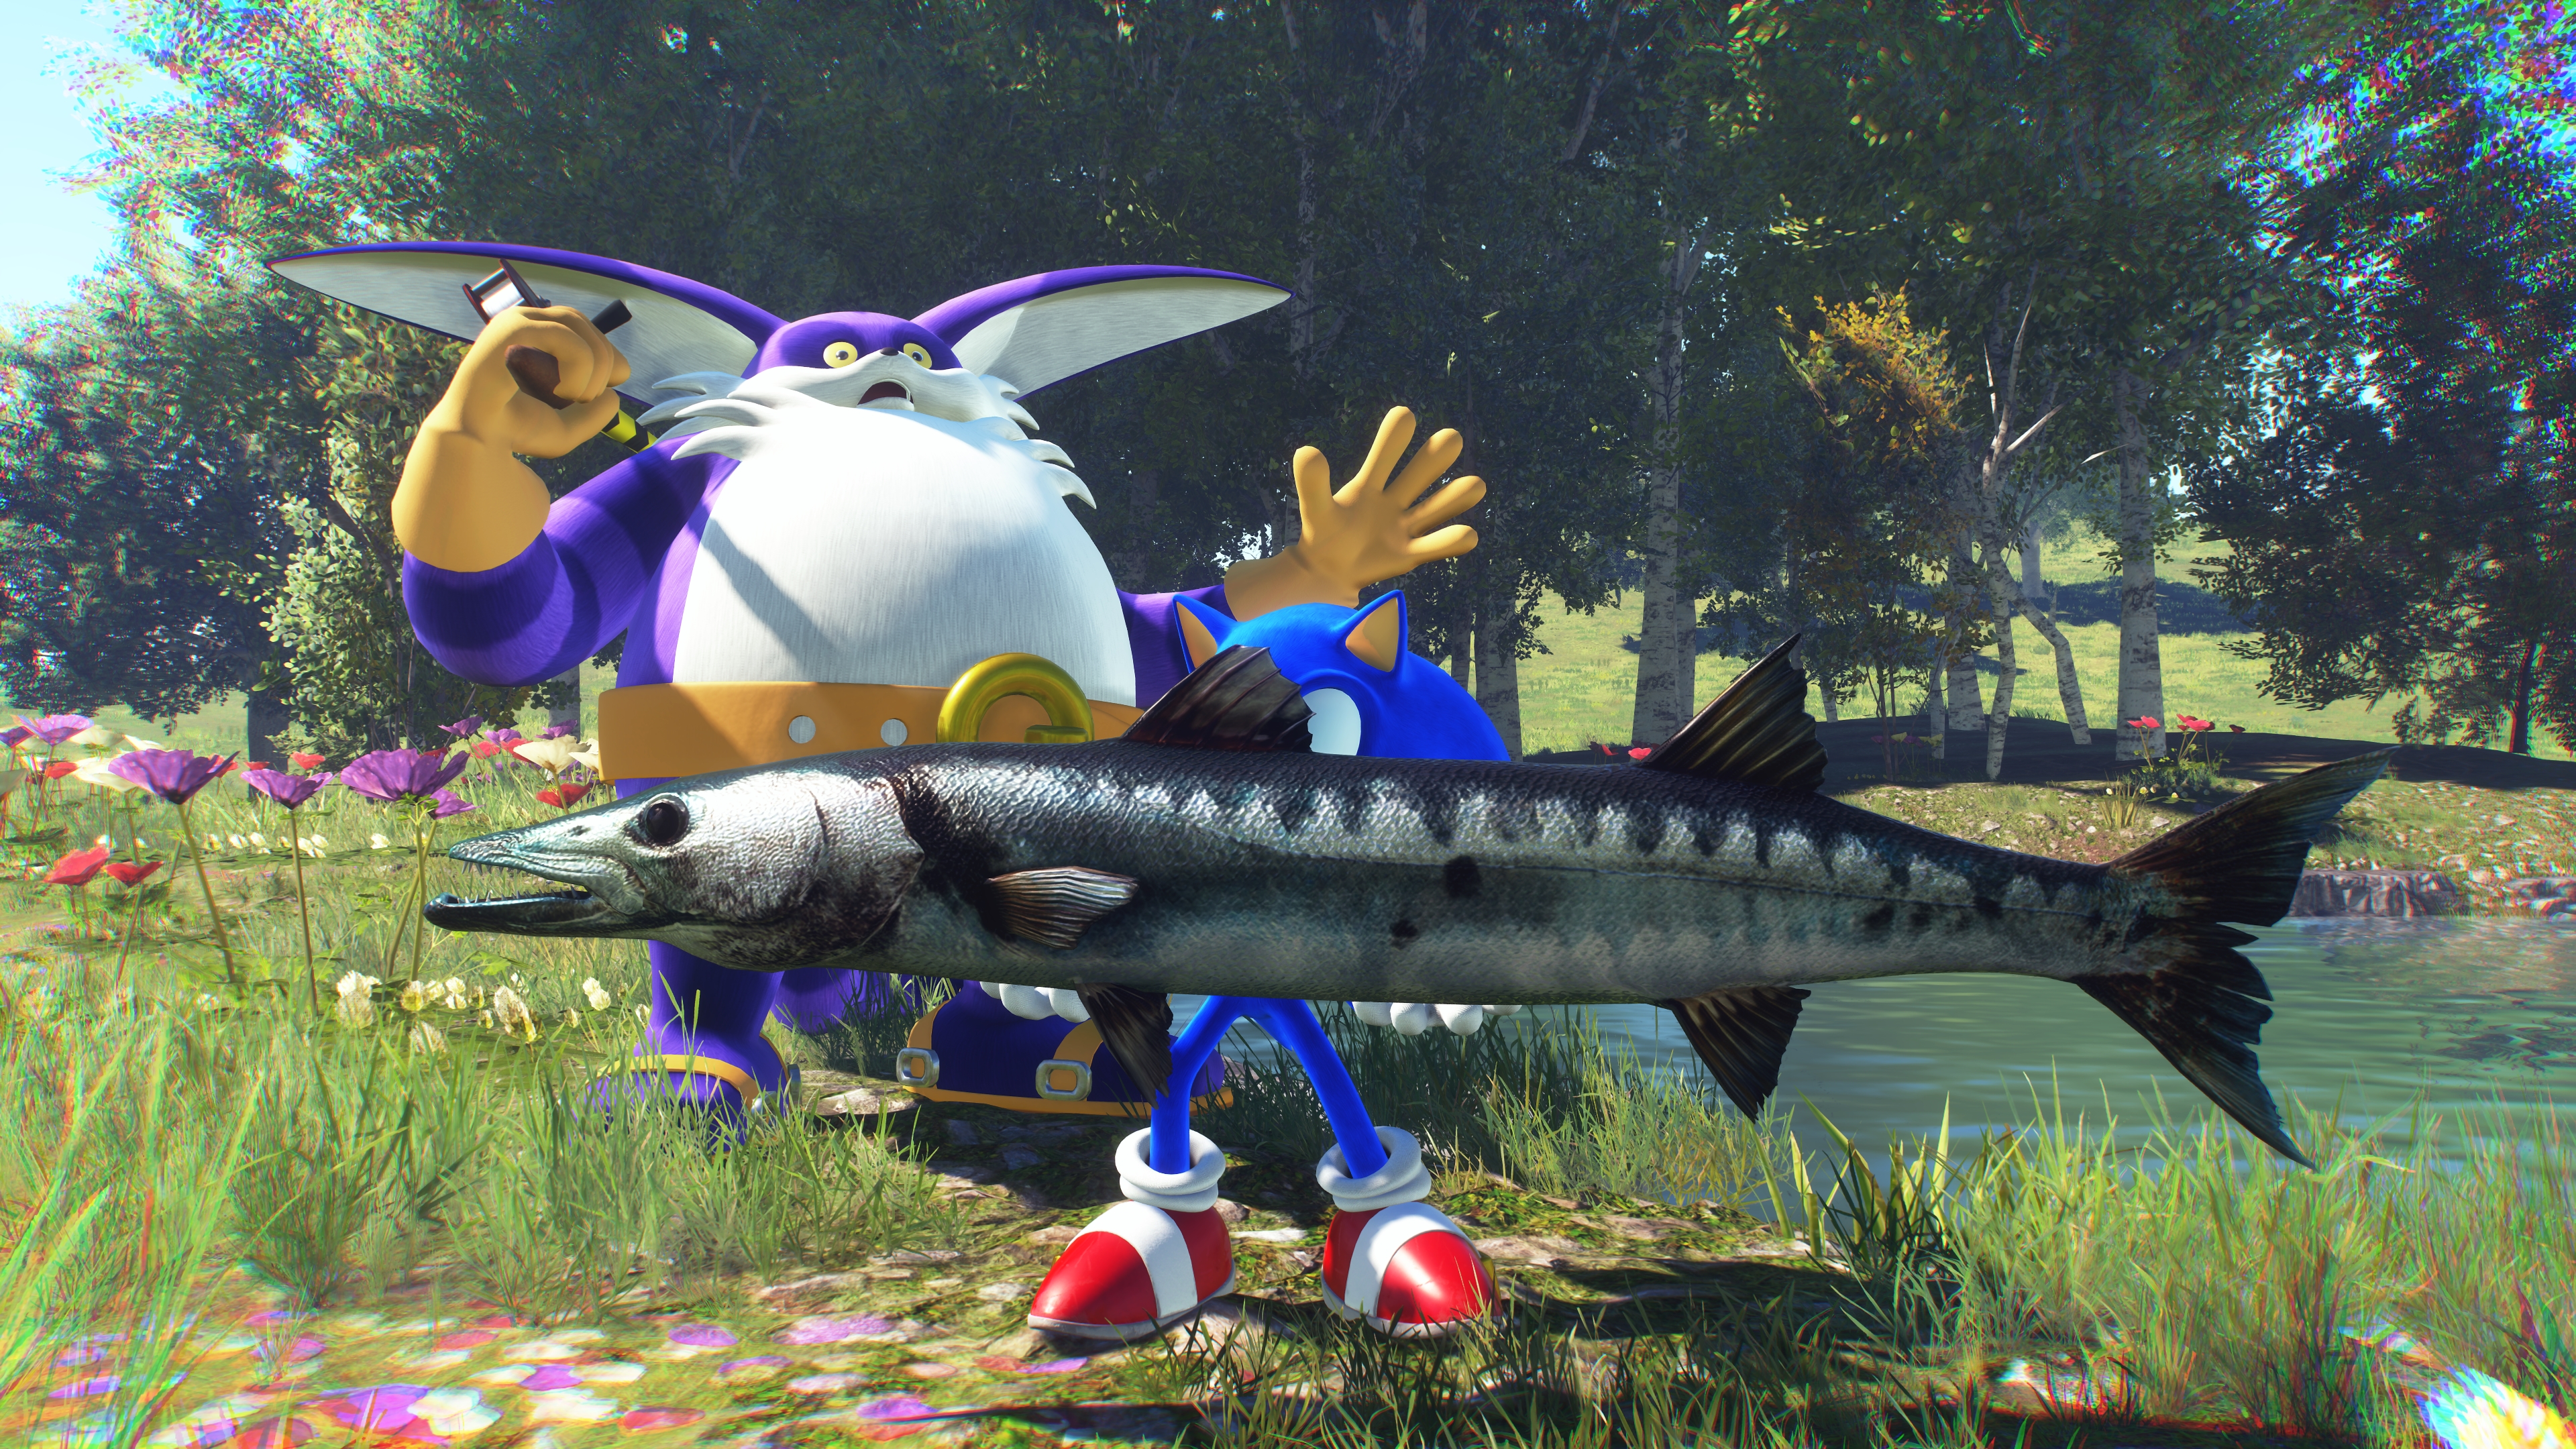 https://static.wikia.nocookie.net/sonic/images/7/7f/Sonic-Frontiers-Promotional-Screenshot-Gamereactor-V.jpg/revision/latest?cb=20221024140809